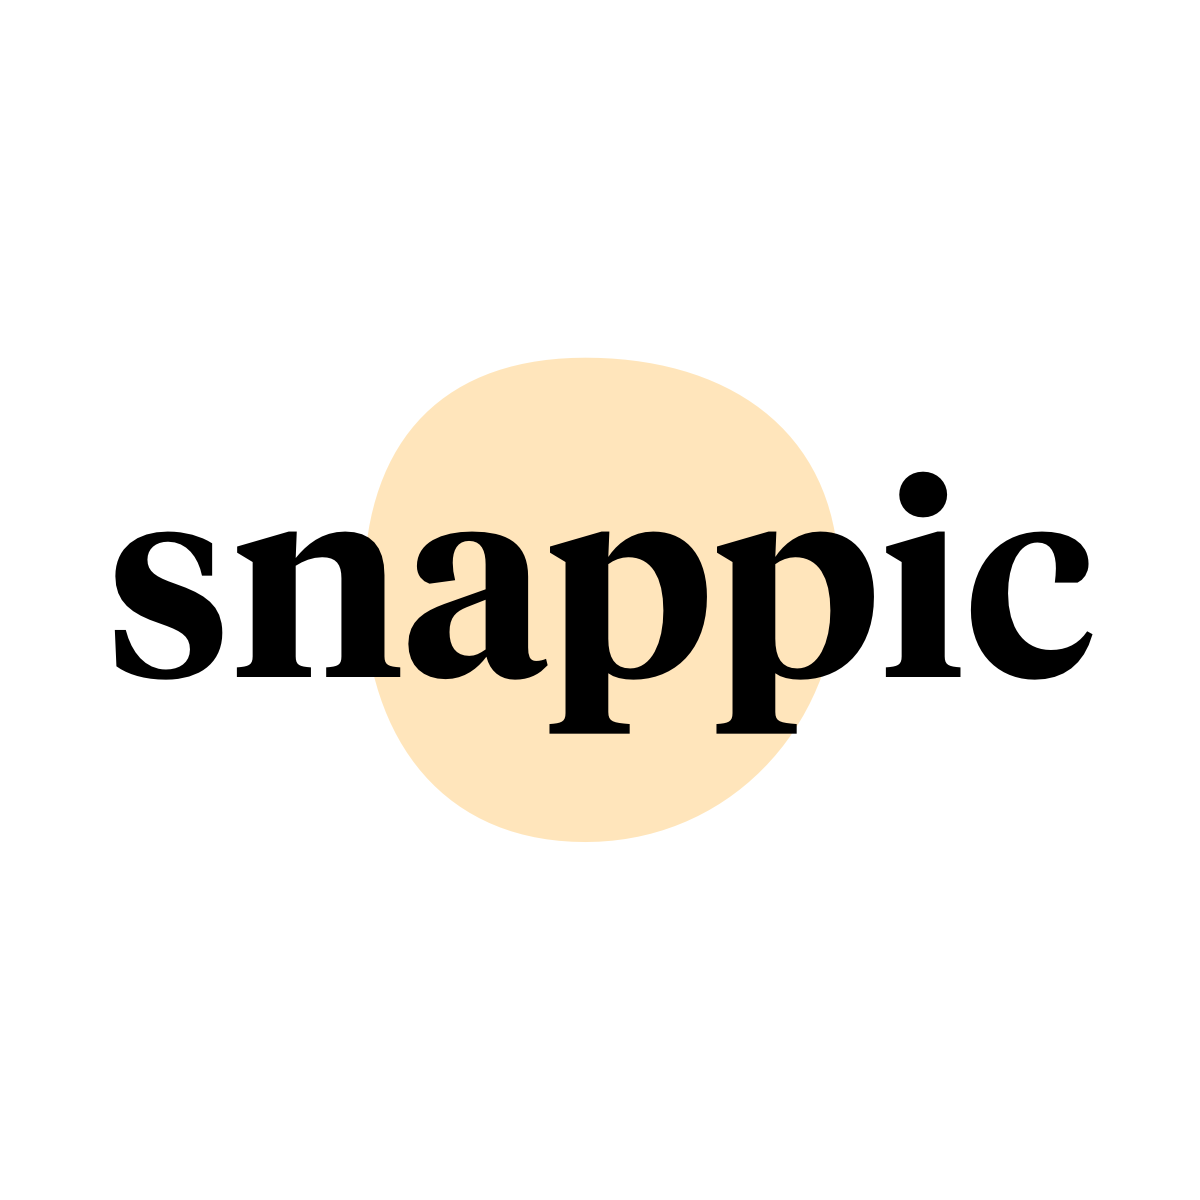 Snappic ‑ Instagram Ads